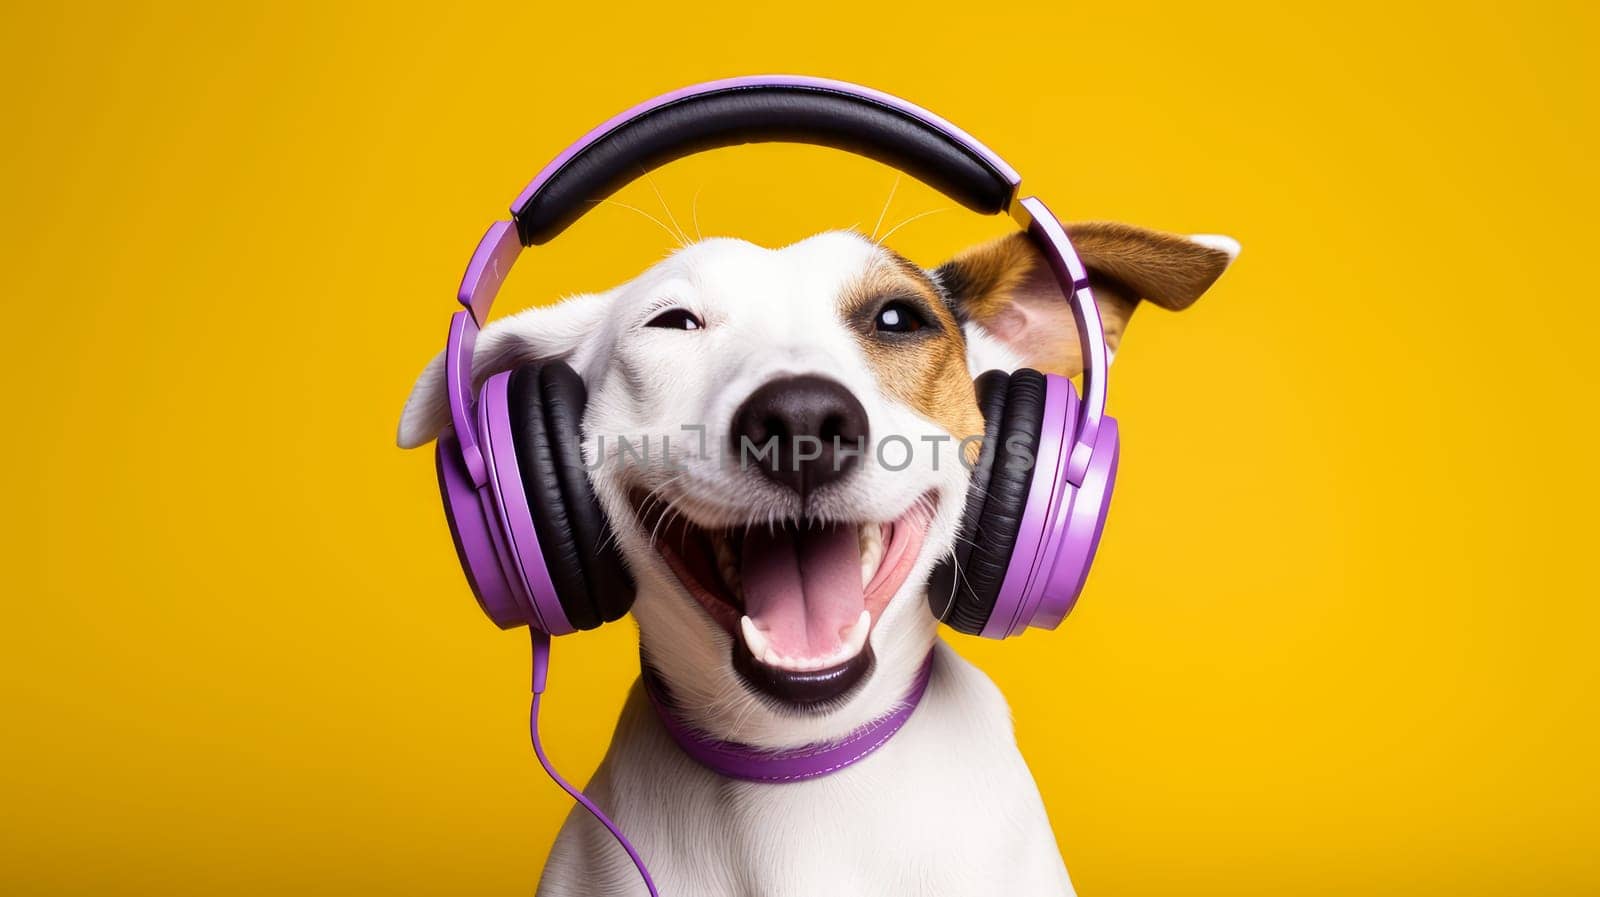 Happy, contented dog listens to music on headphones while on vacation or relaxing on a yellow background. Advertising holidays for animals, music store, pet store, modern training and courses